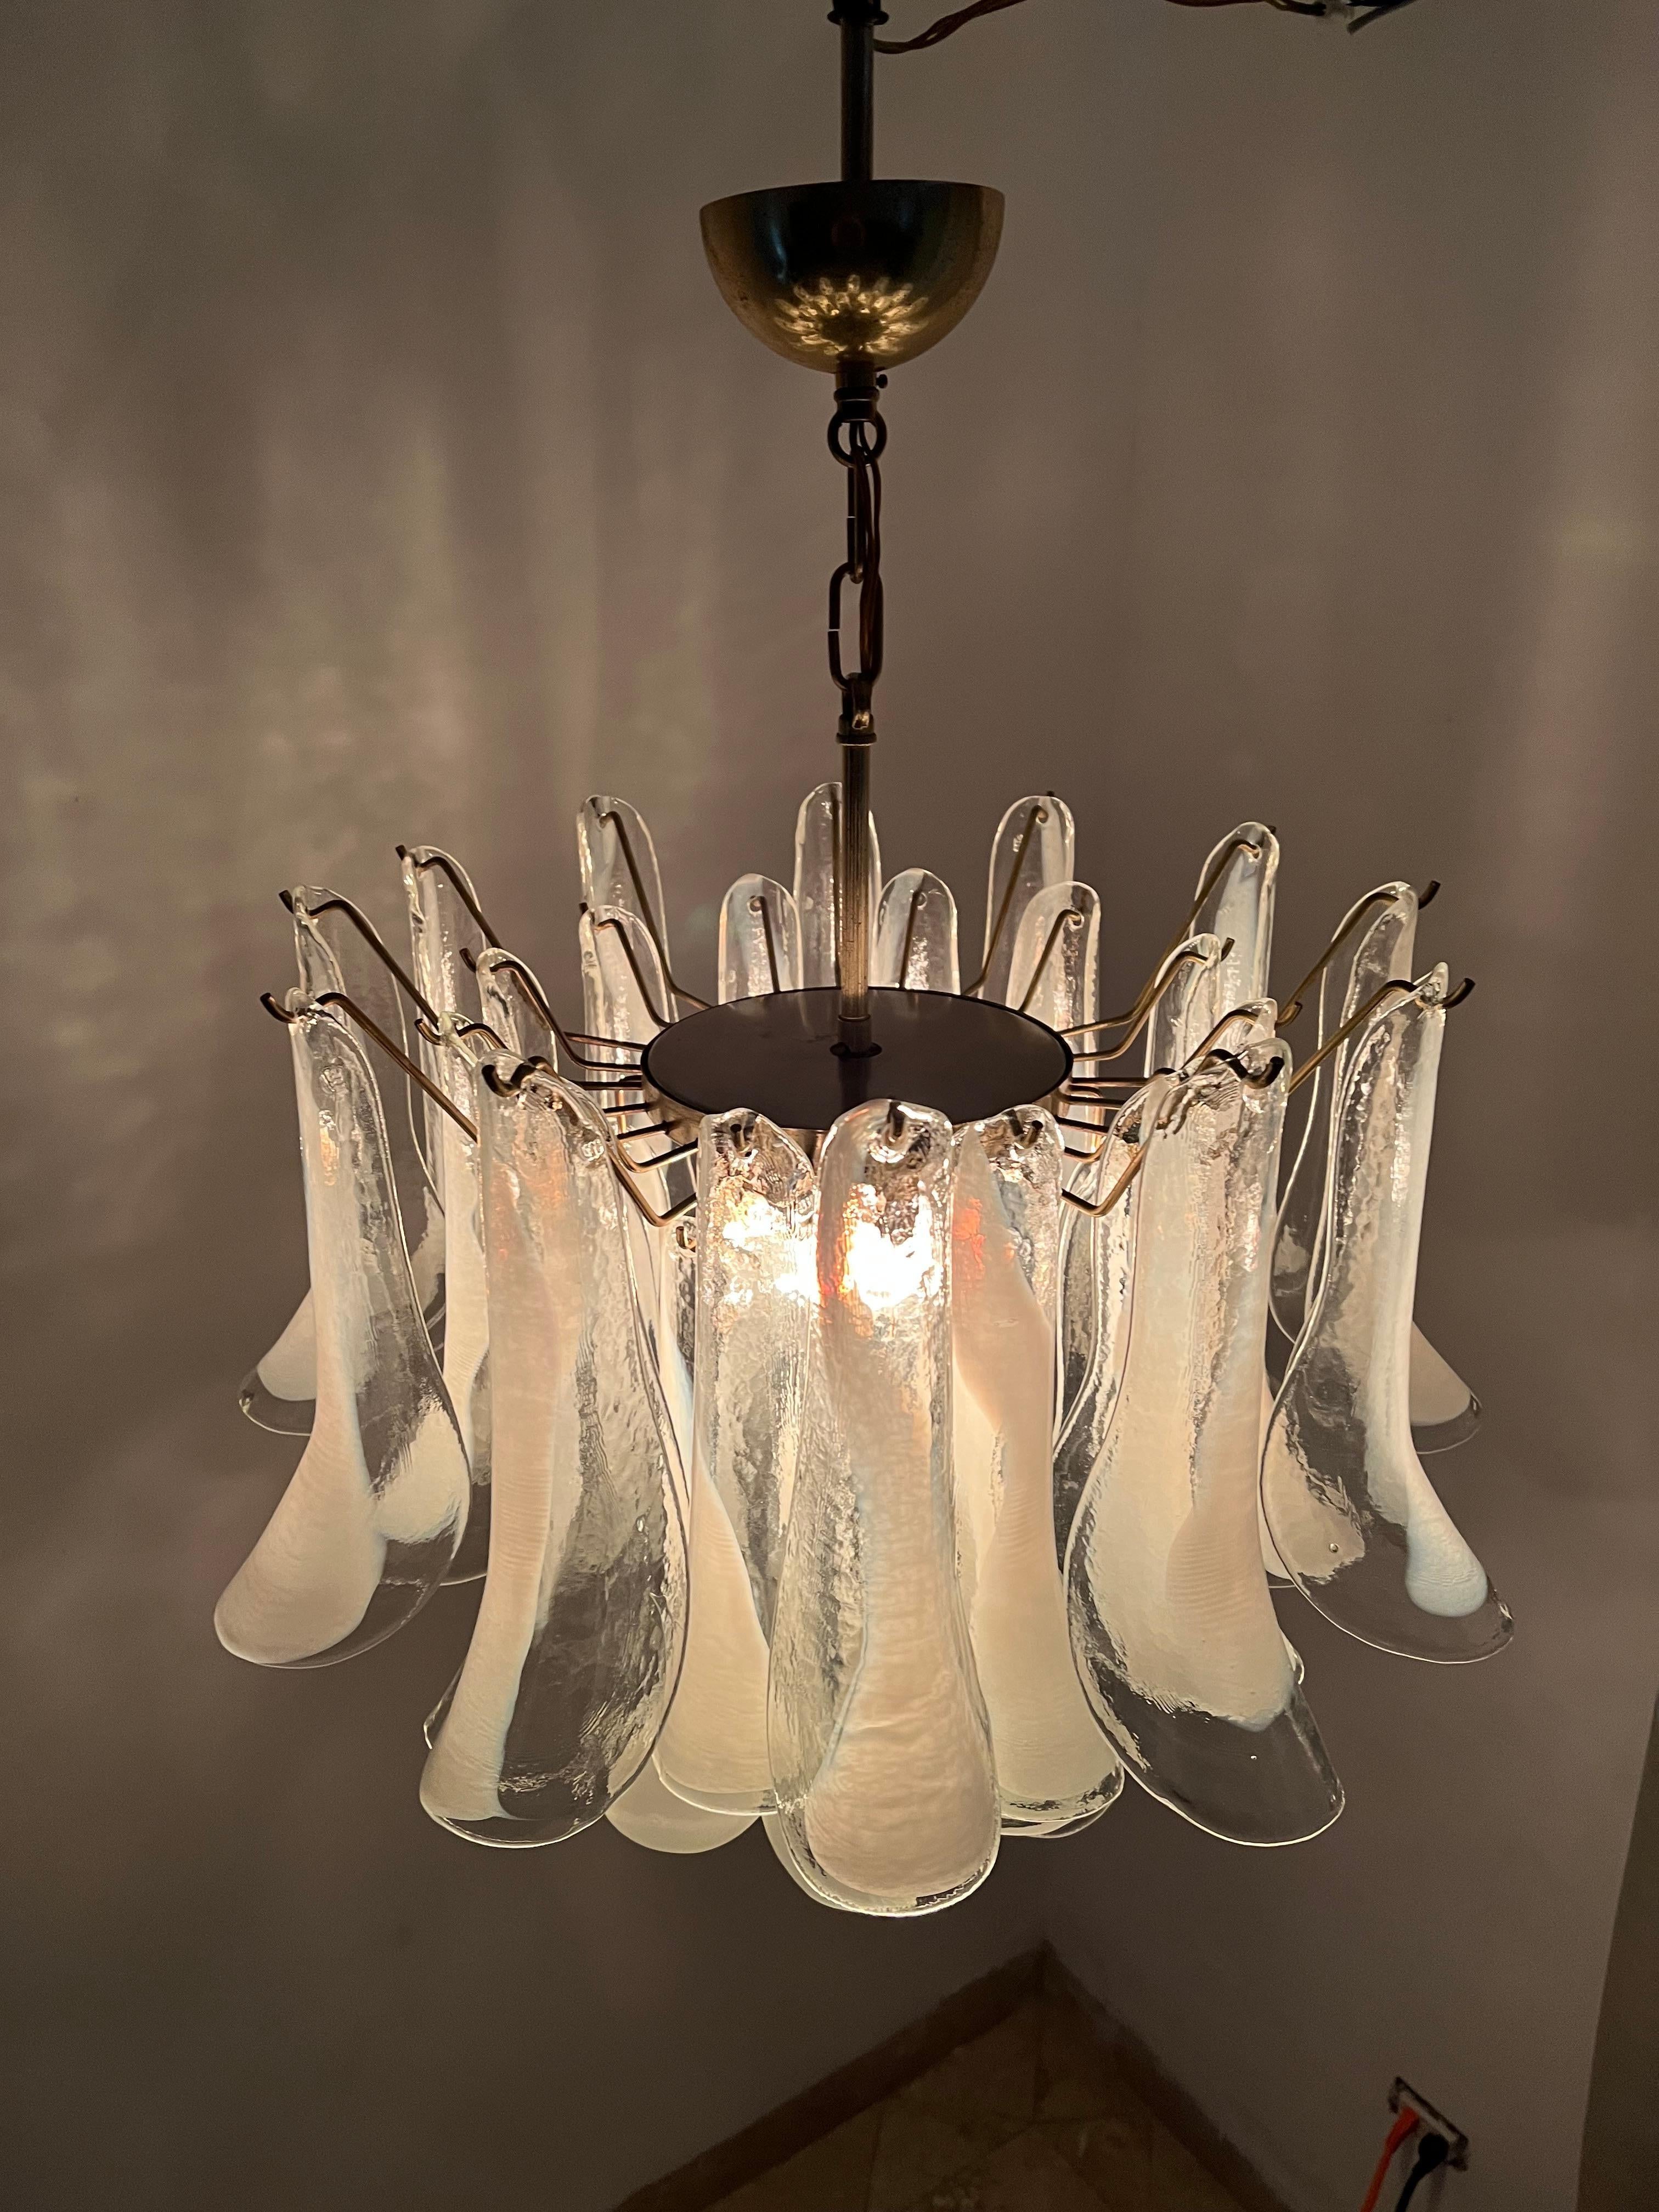 Two Identical Signed Mid-Century Modern Chandeliers, La Murrina in Murano Glass For Sale 7